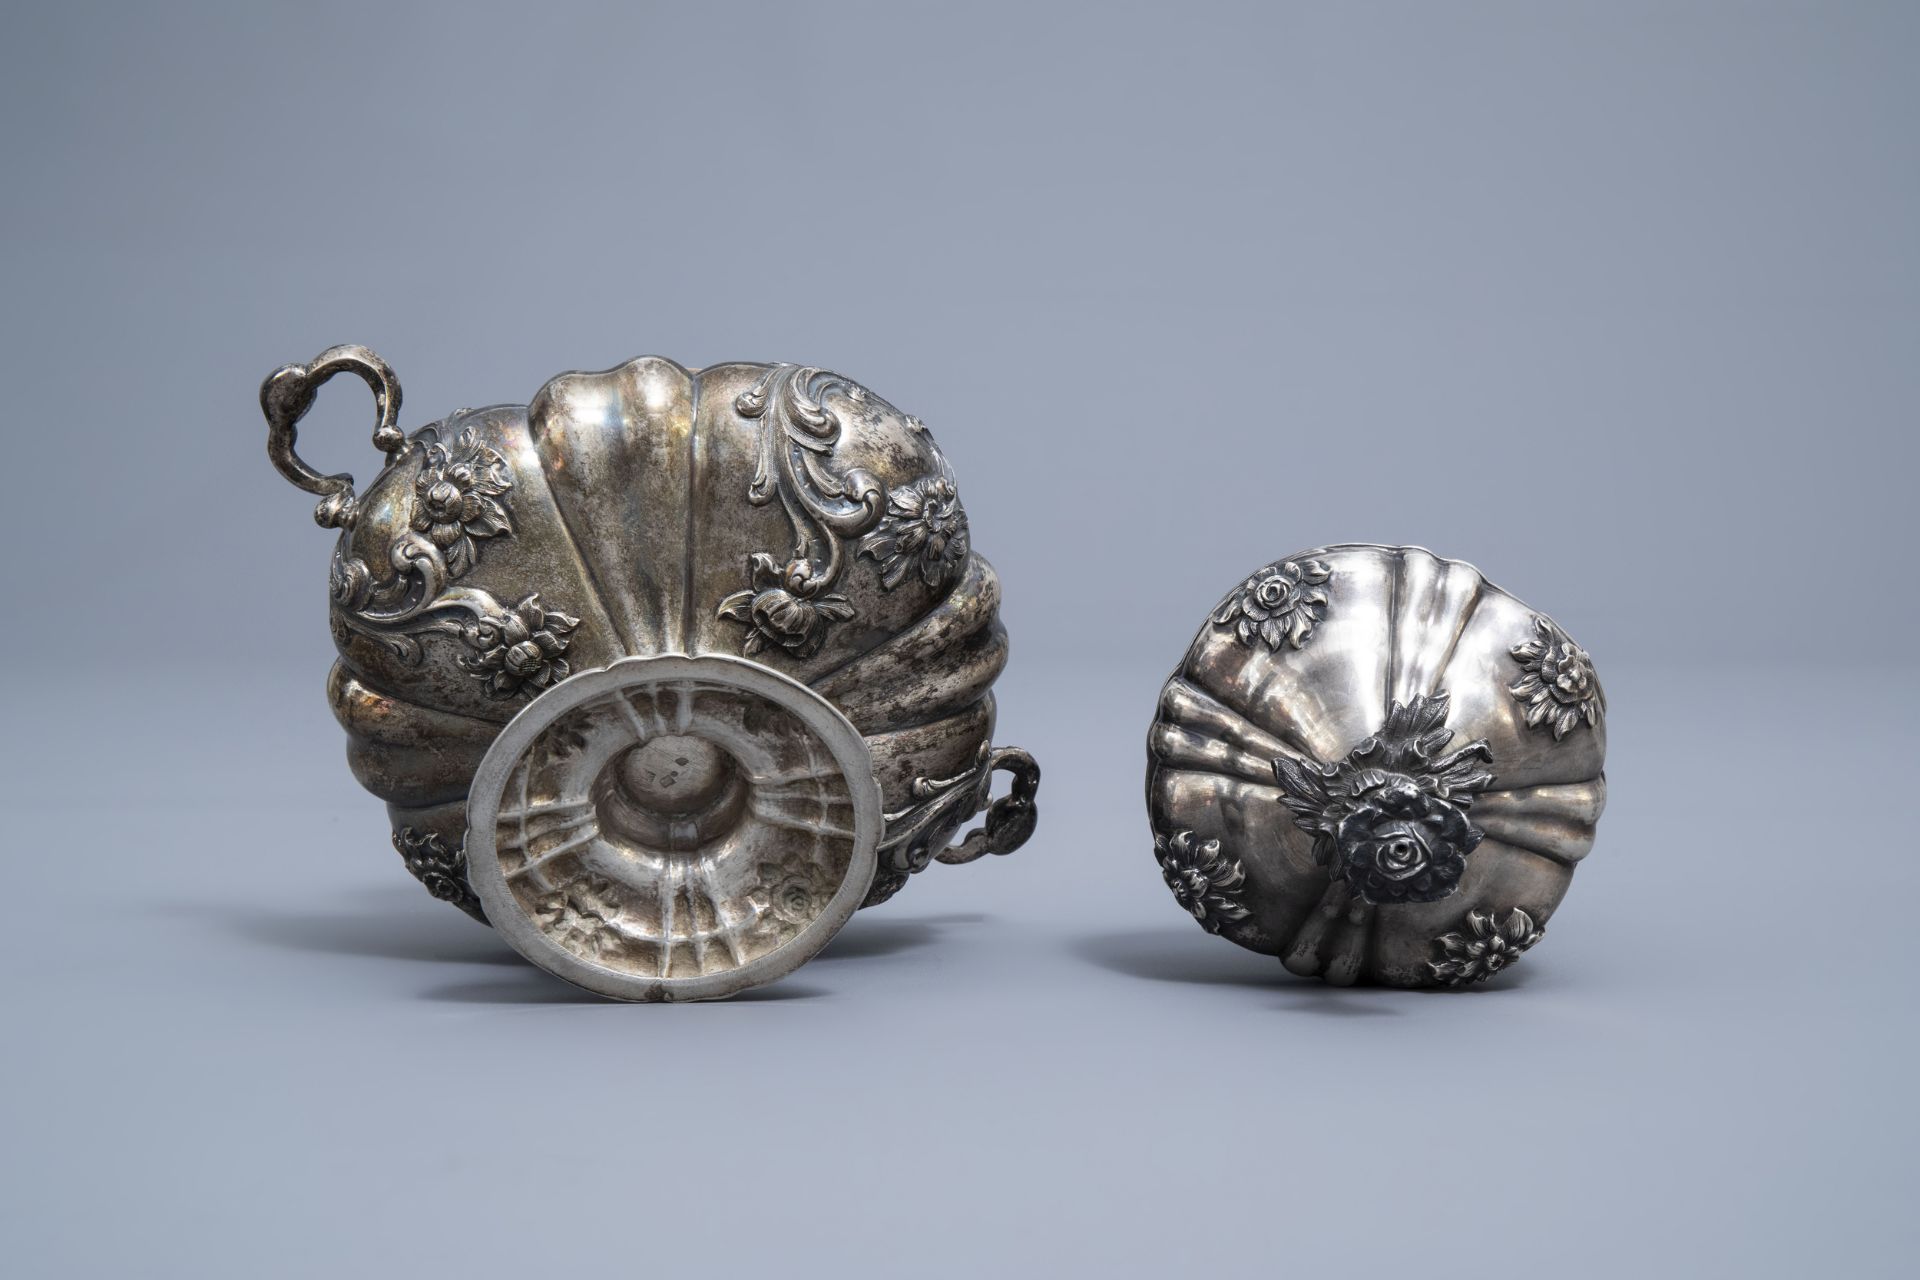 A Belgian silver sugar bowl with relief design, mark Wolfers, 833/000, Brussels, 19th C. - Image 8 of 11